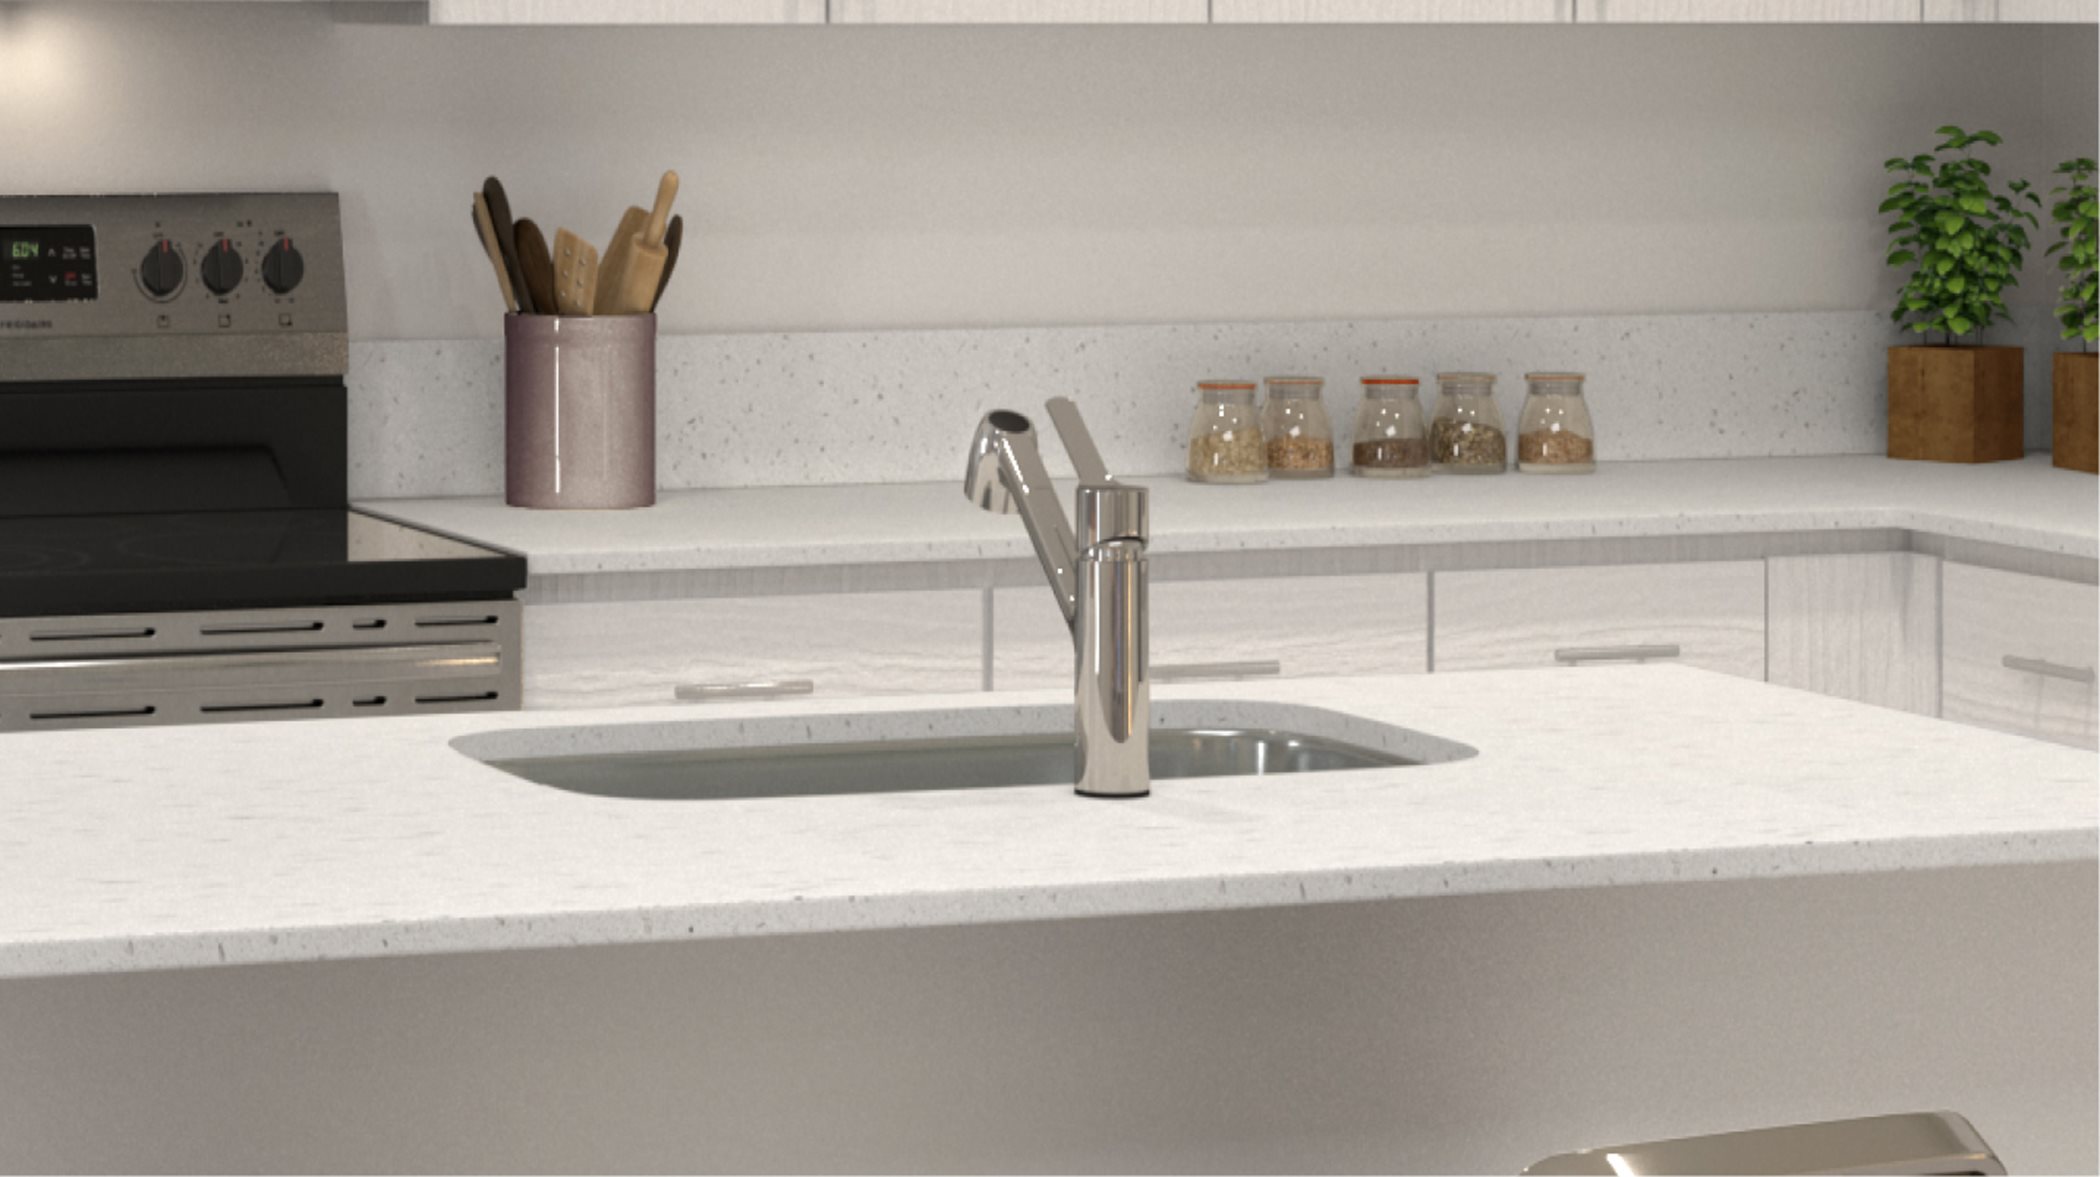 Stainless steel sink and faucet